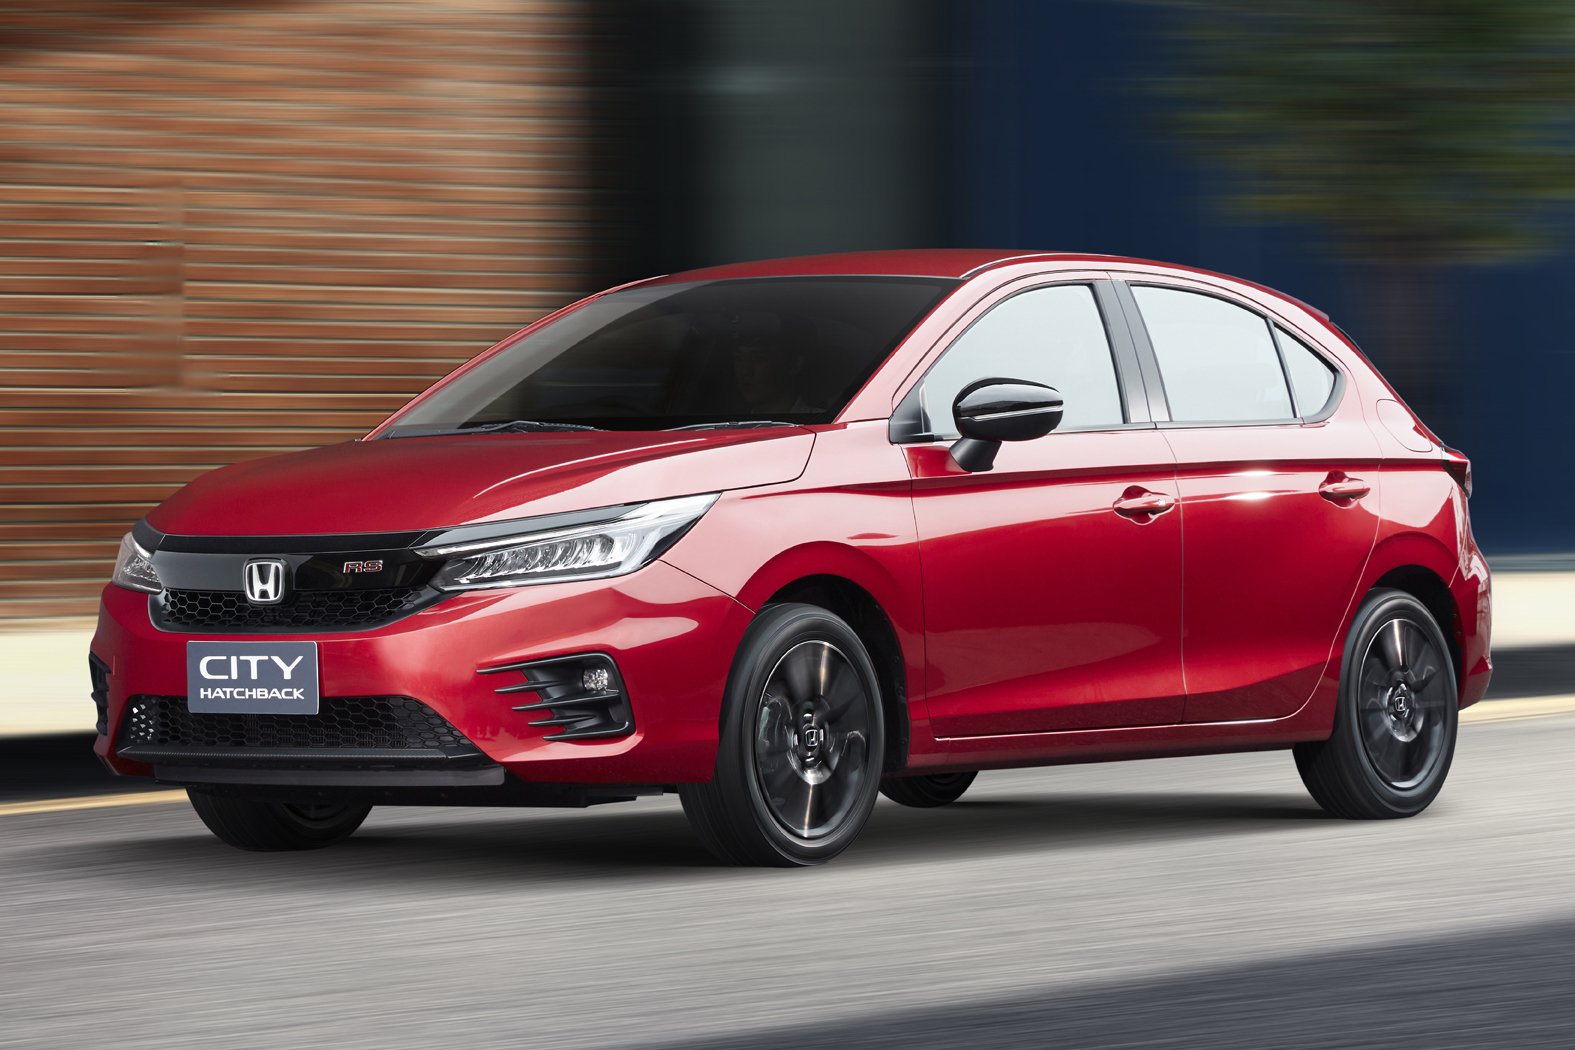 Honda City Hatchback To Arrive In The Philippines This Year